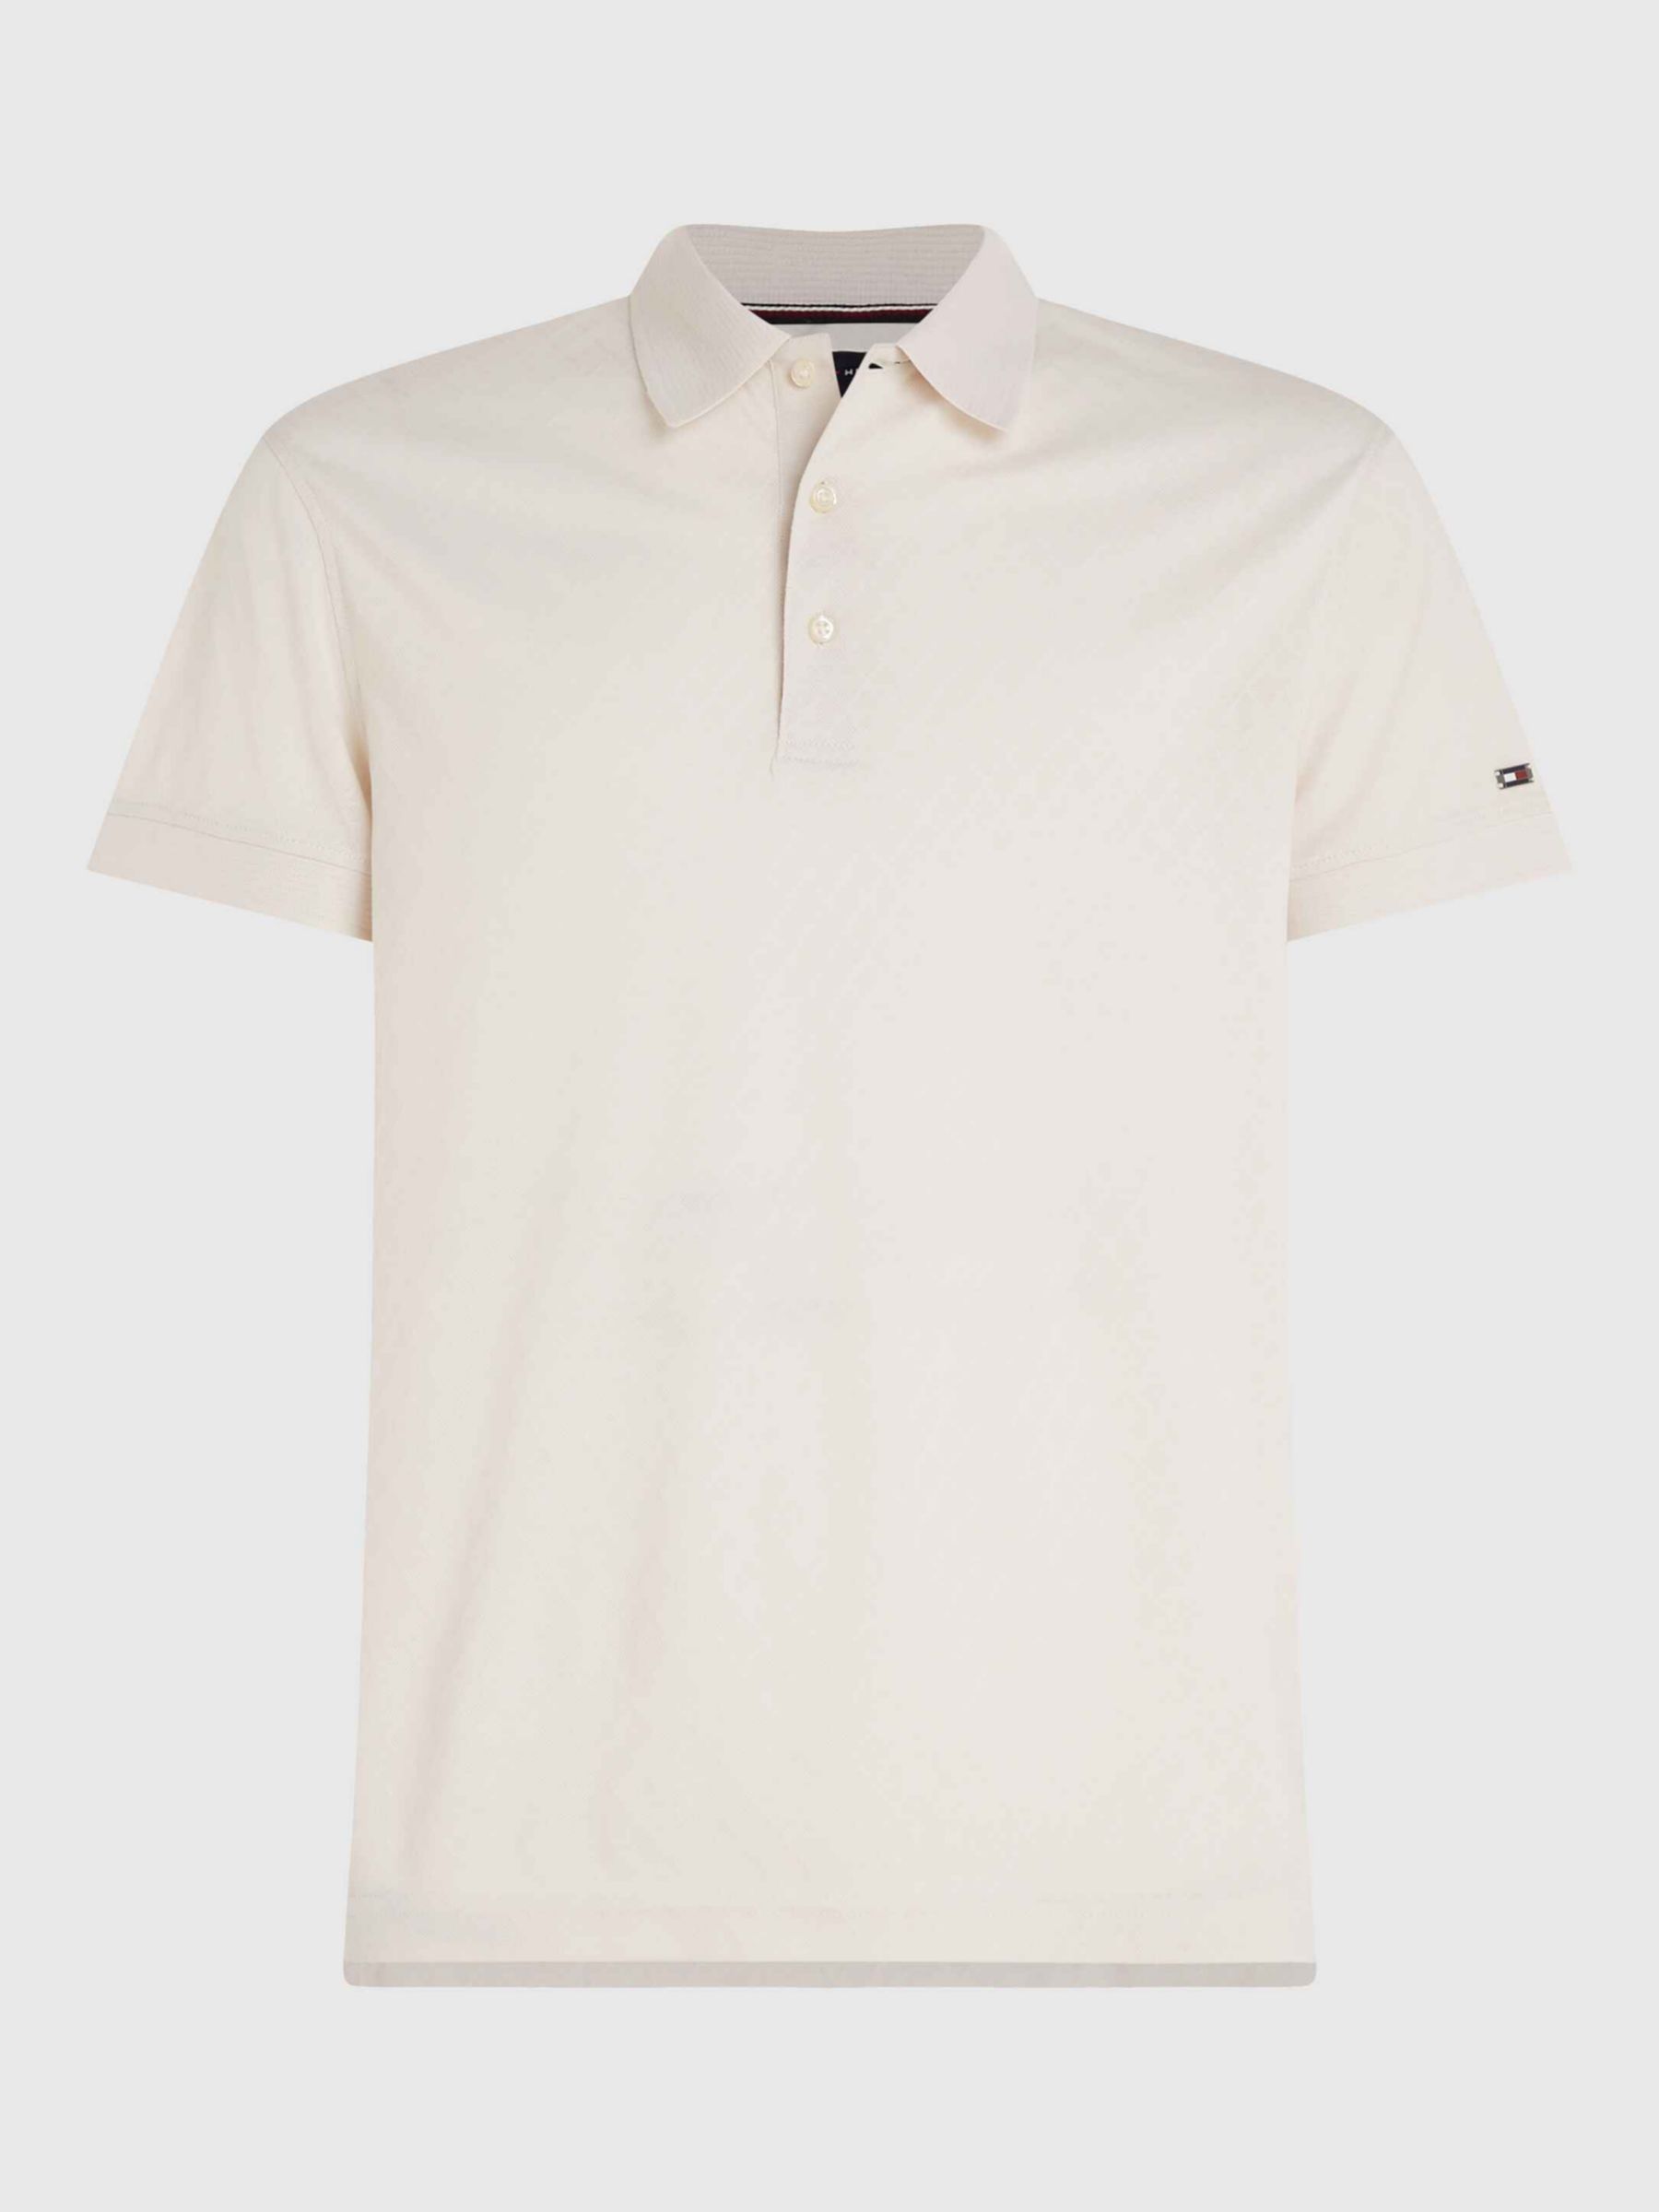 Buy Tommy Hilfiger Tonal Structure Slim Polo Top Online at johnlewis.com